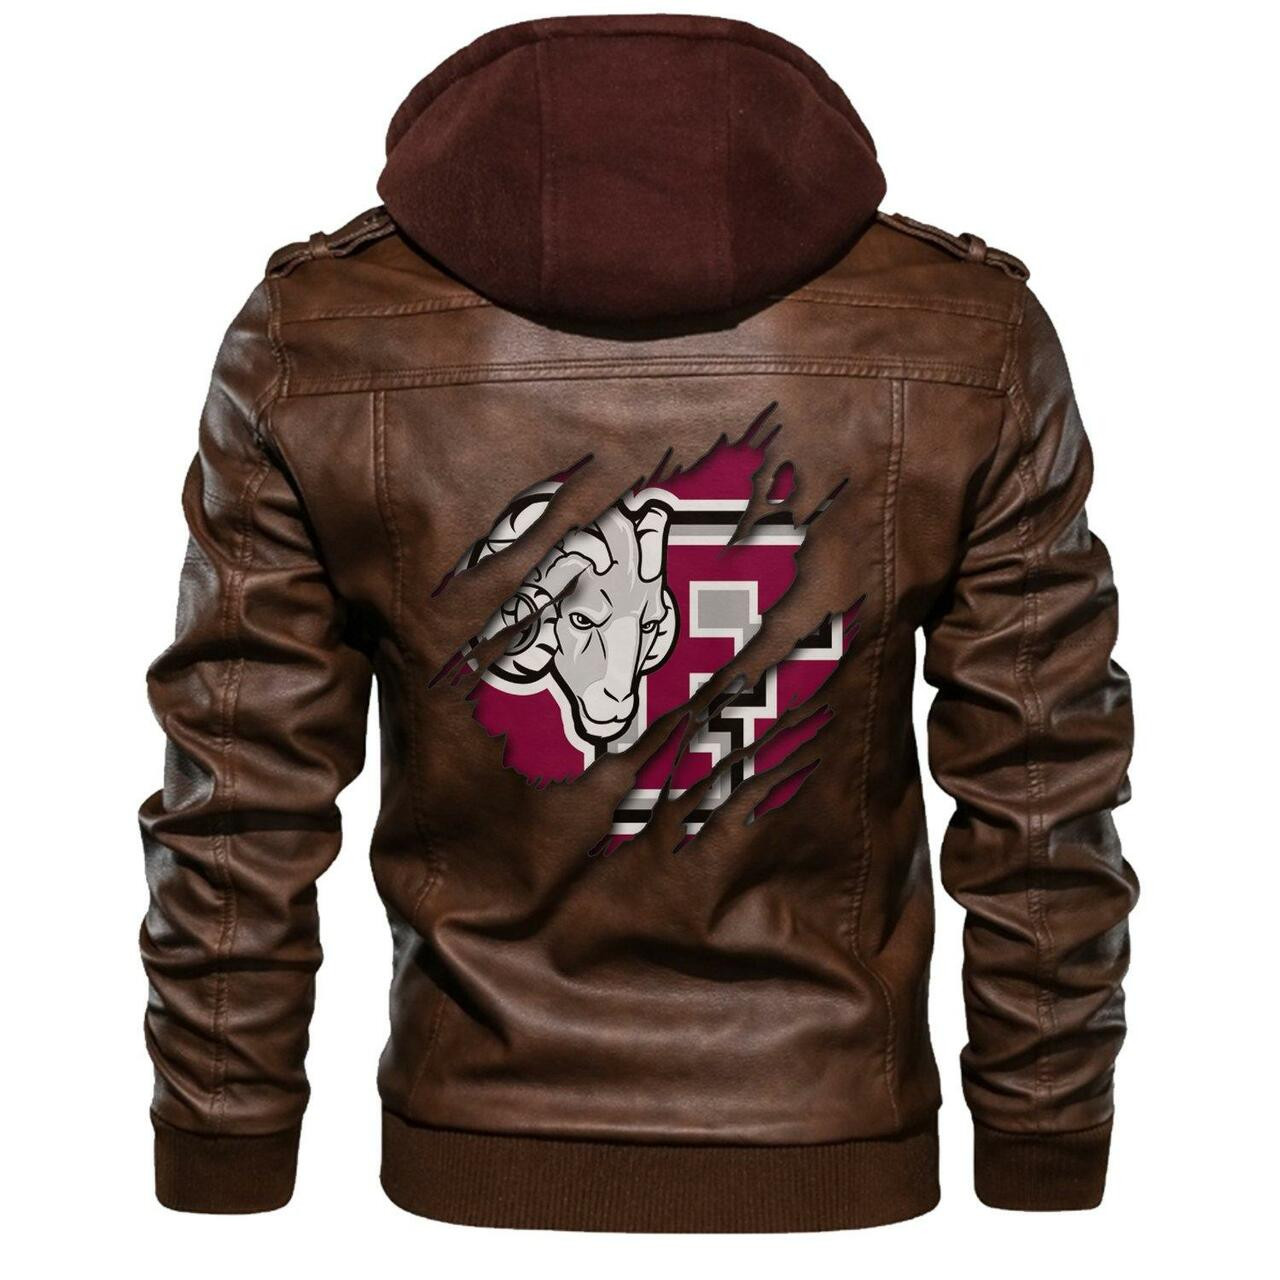 Our store has all of the latest leather jacket 33